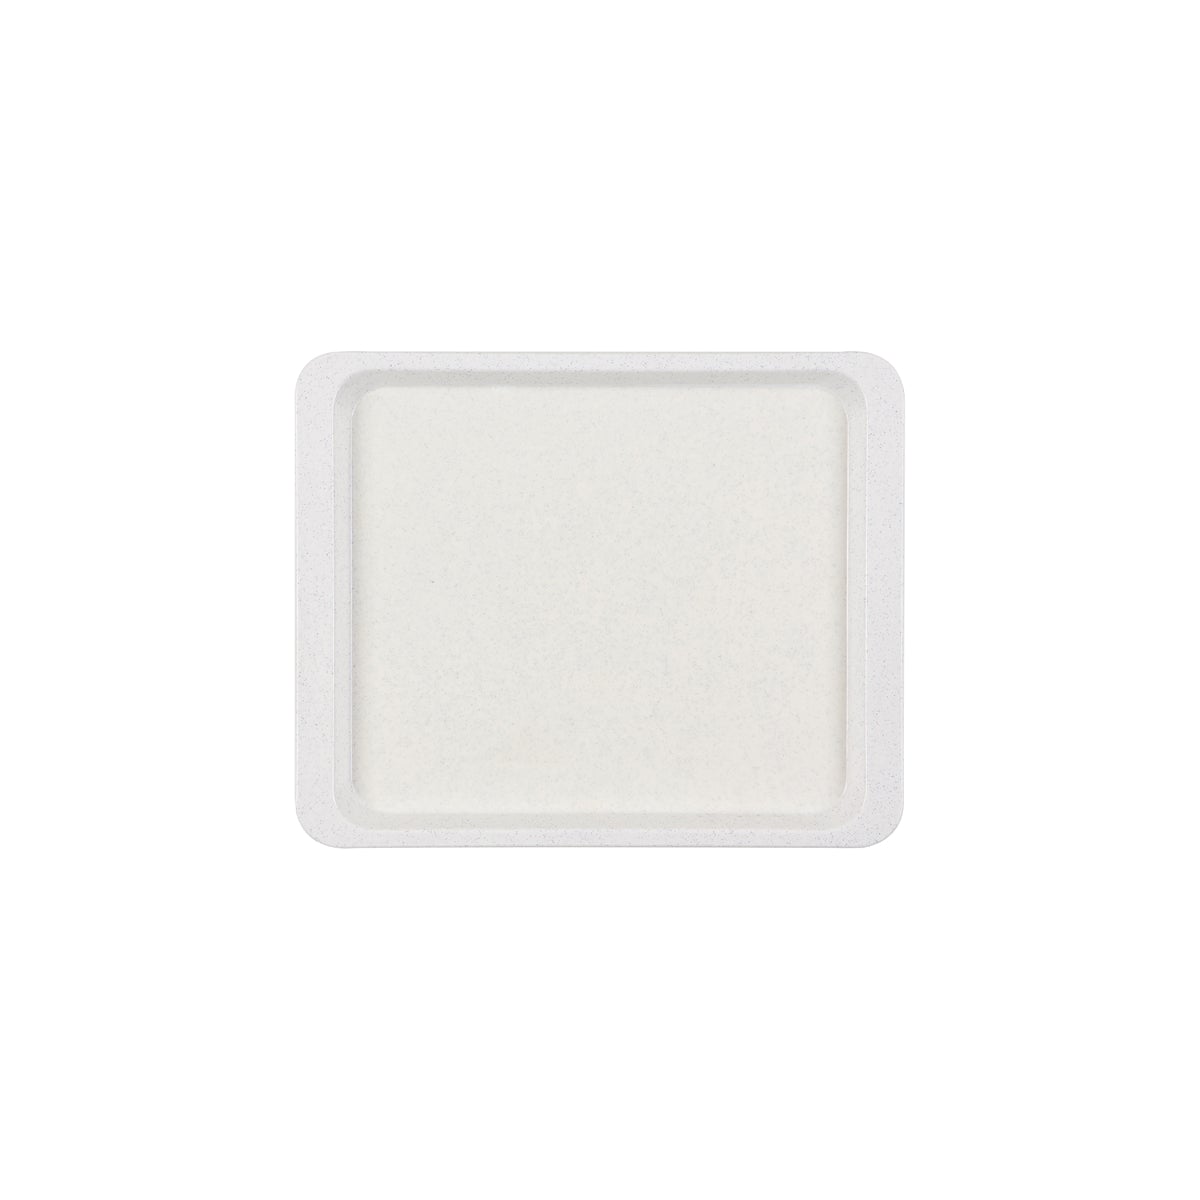 KCPOL265325/WH-SM Kocel Poly White Rectangular Tray Gastronorm 1/2 Size Smooth 325x265mm Tomkin Australia Hospitality Supplies